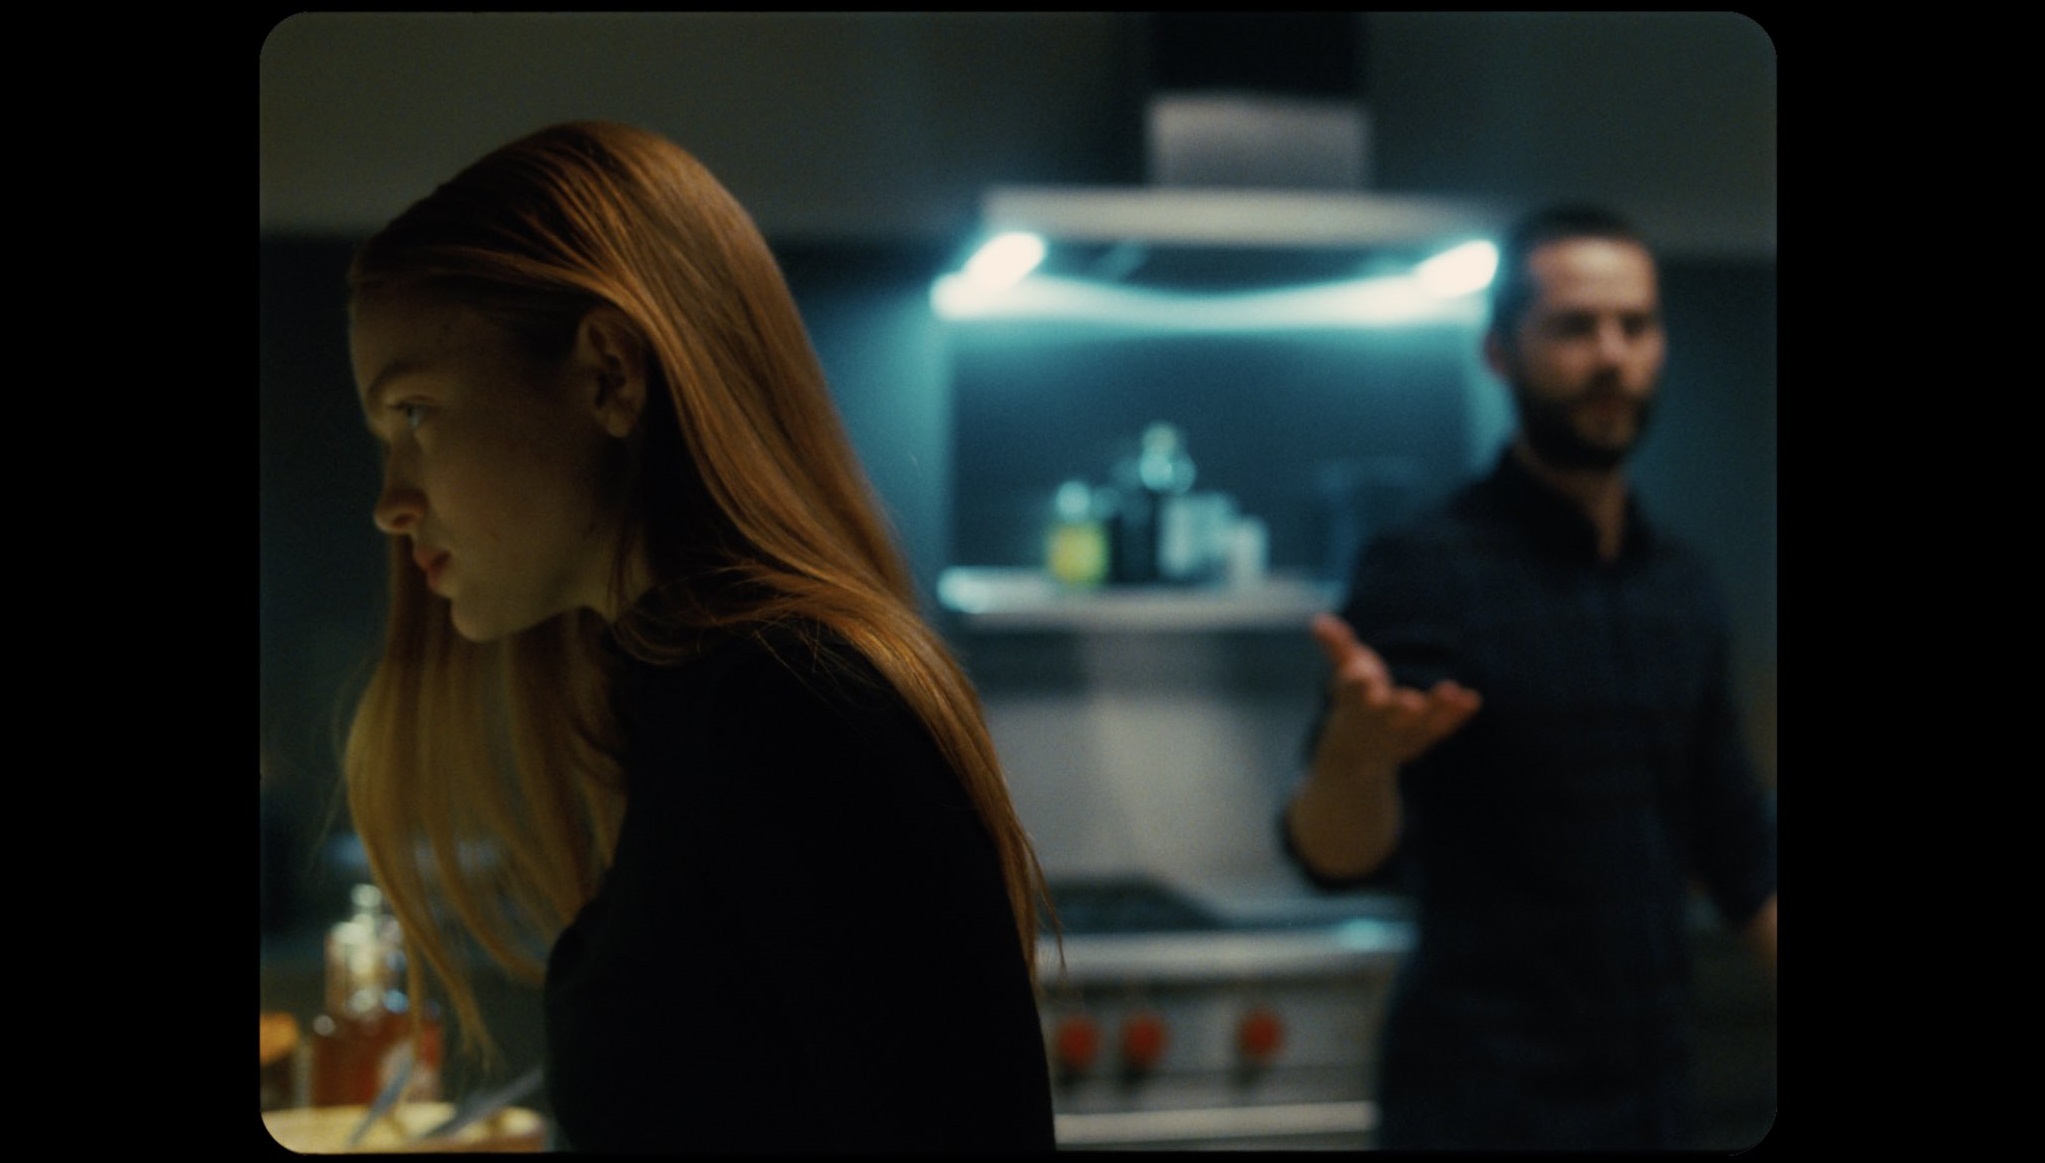 In a medium shot, Sink stands in the foreground colored in yellow lighting with an irritated look on her face. O'Brien is out of focus, a few steps behind her, with an outstreched hand colored in artifical blue lighting. 